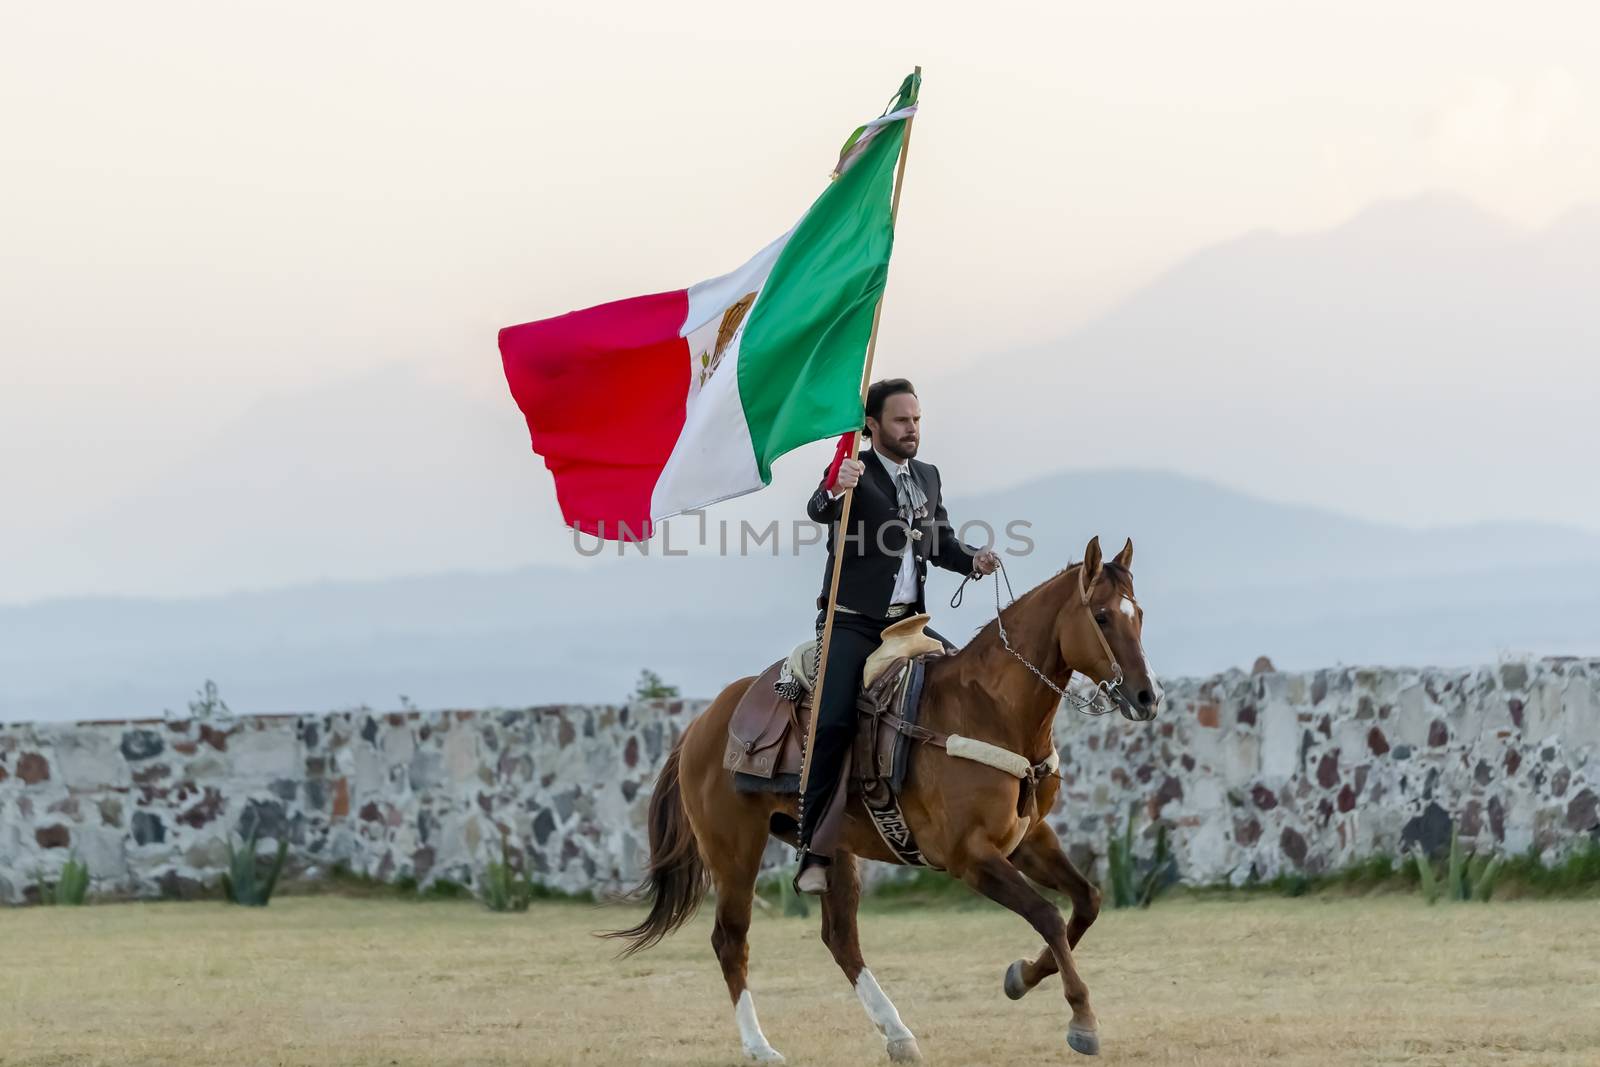 A Very Handsome Mexican Charro Poses In Front Of A Hacienda In The Mexican Countryside While Holding The Mexican Flag by actionsports